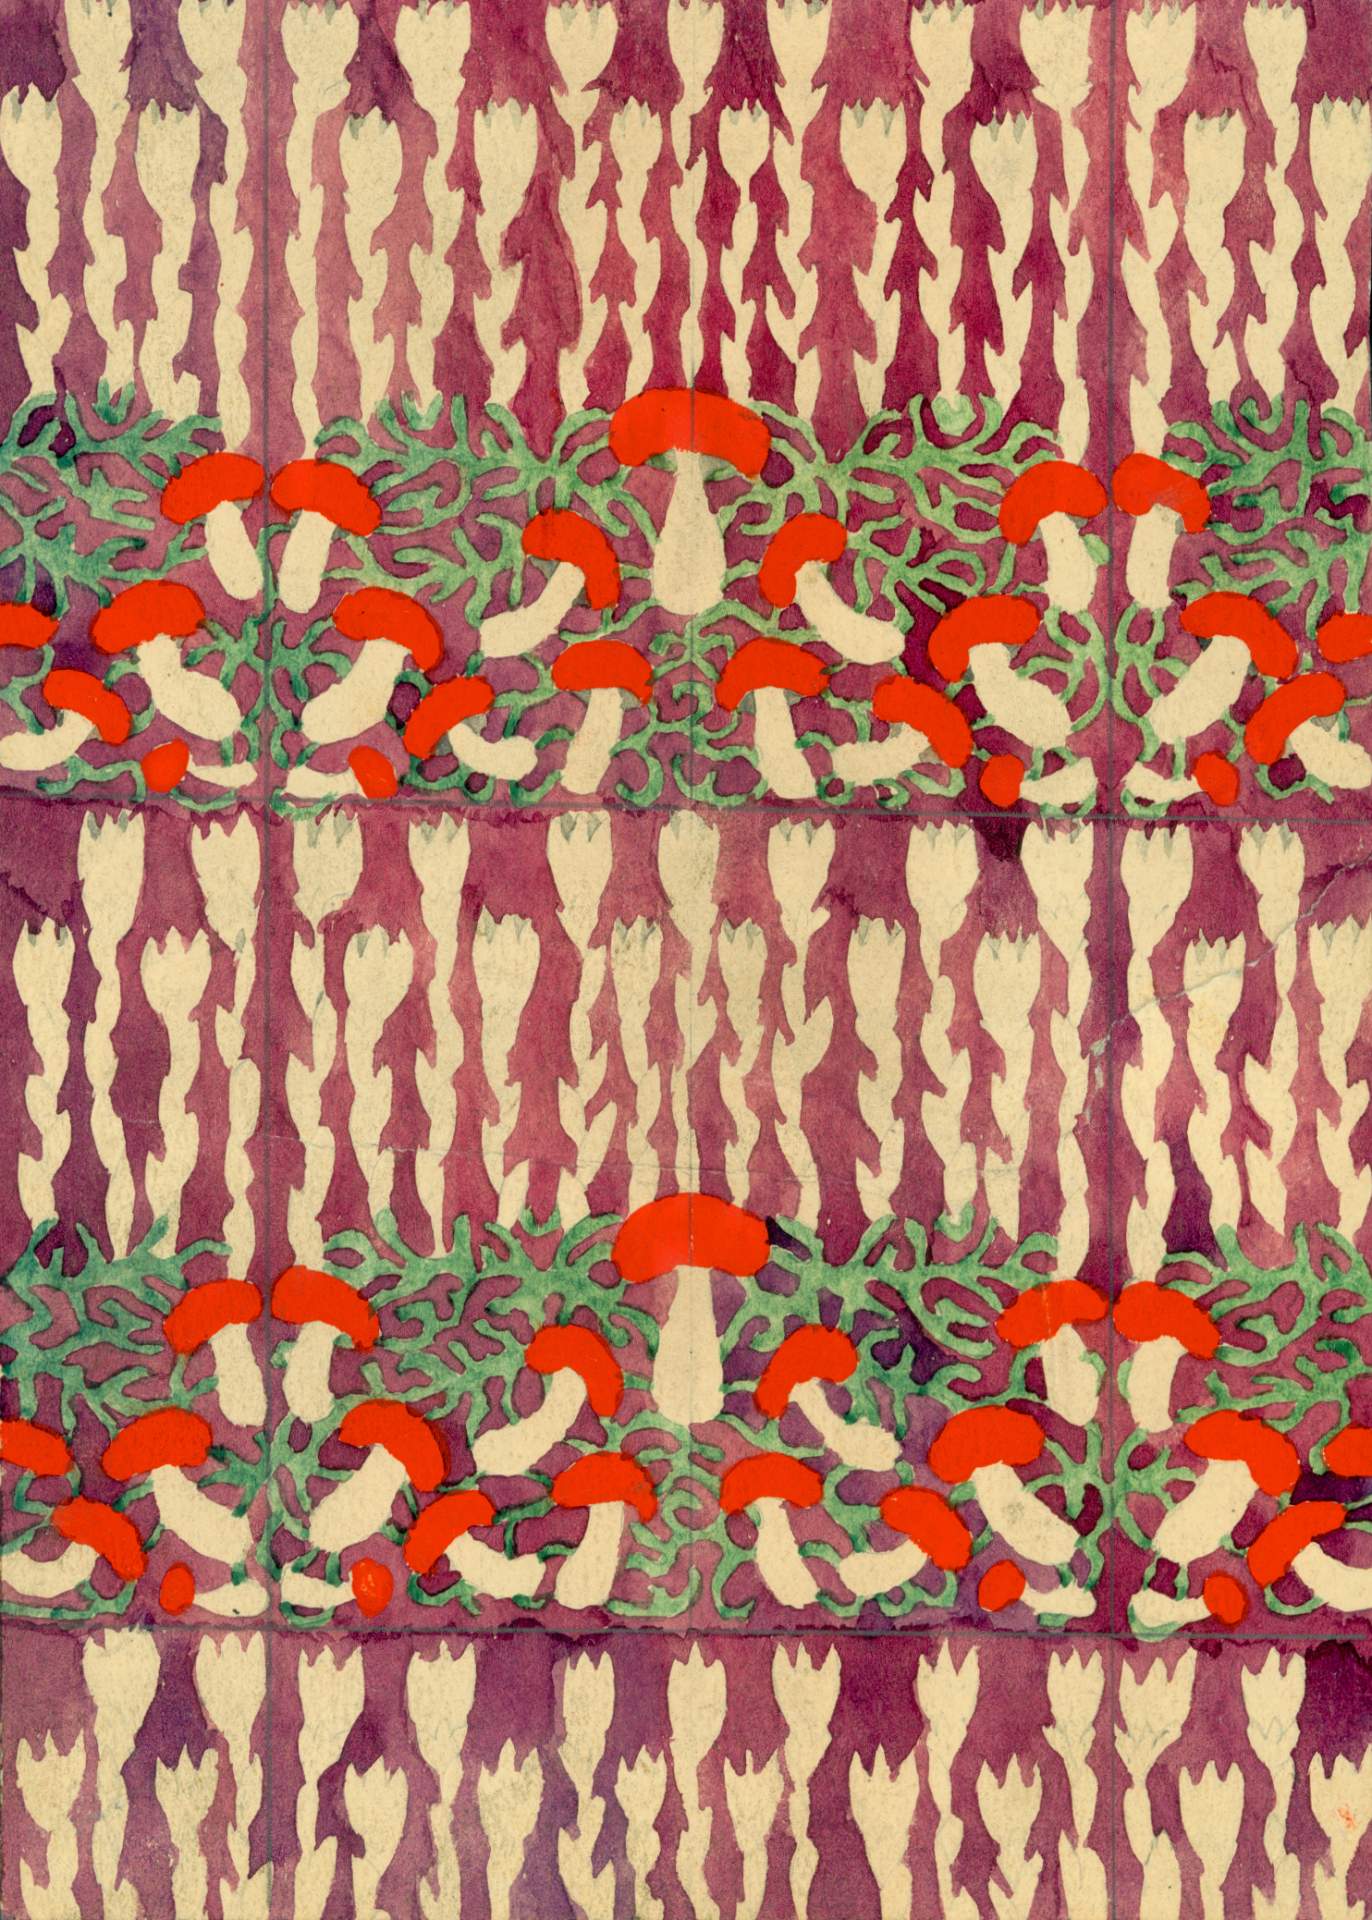 Indian Pipe and Red-Capped Mushrooms, Design for a Tile